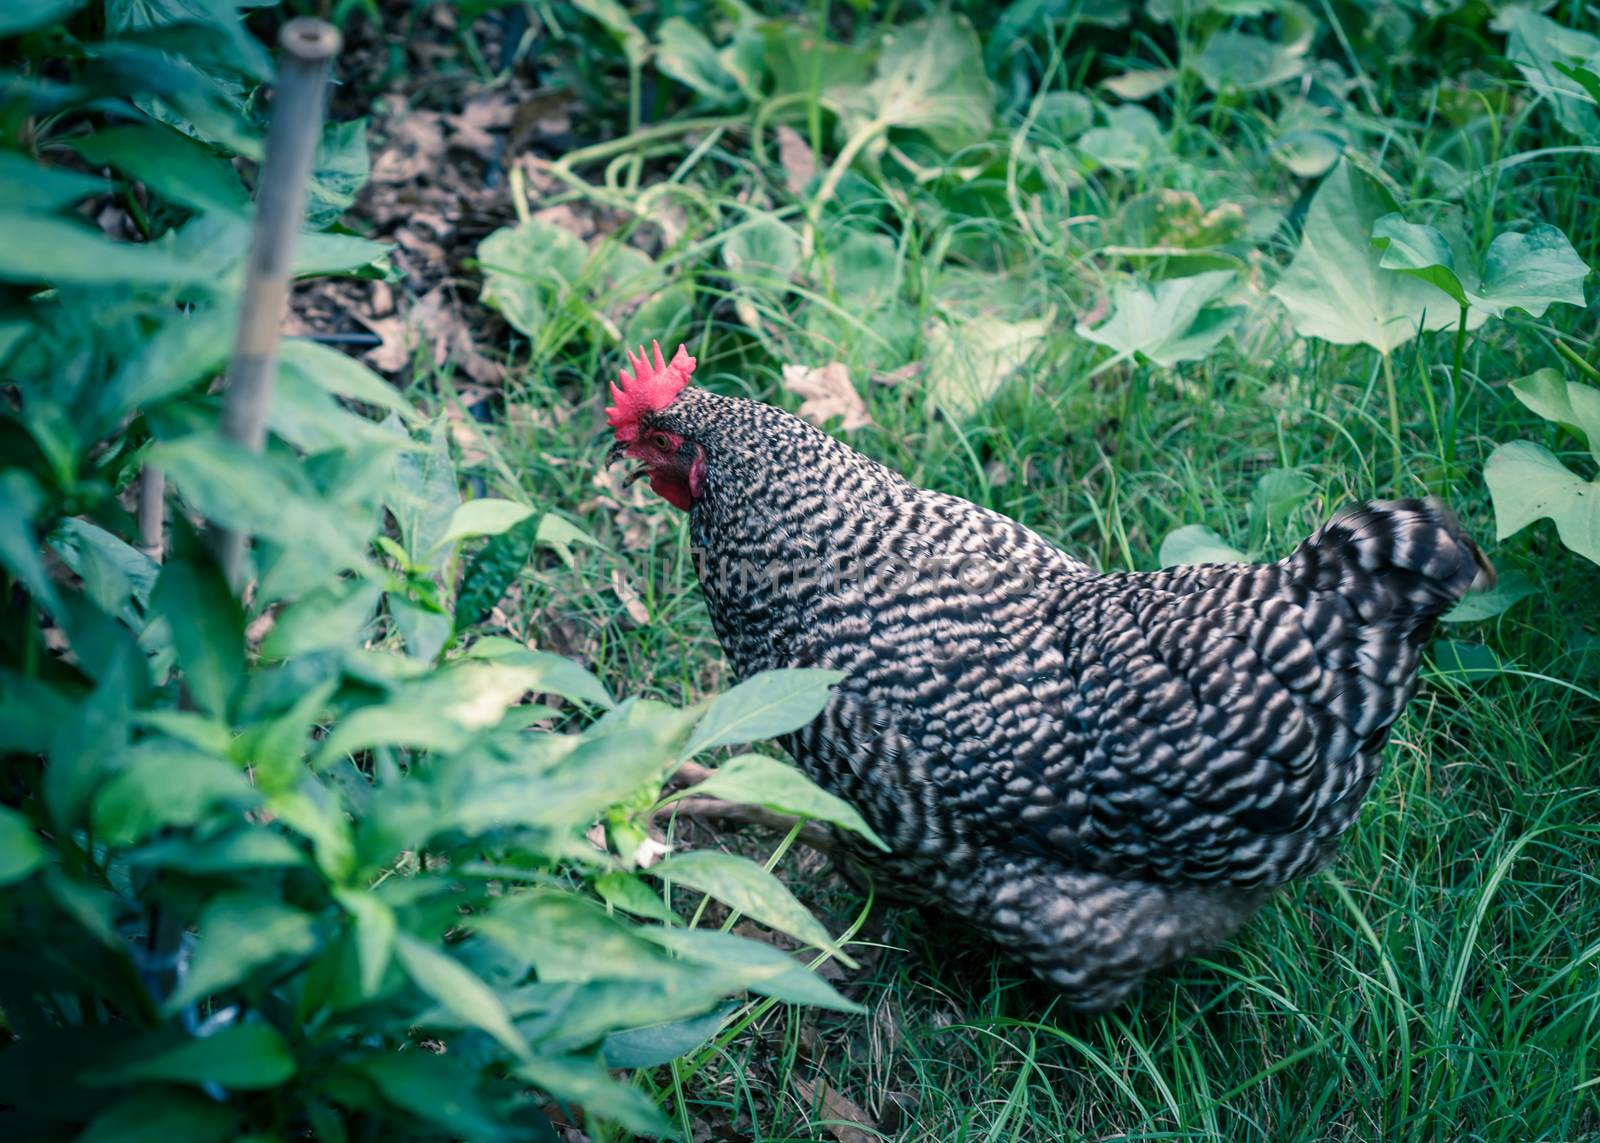 Selective focus one free range chicken at backyard garden near Dallas, Texas, America. Marans breed barred feathering laying hen chick pecking in natural settings at vegetable allotment